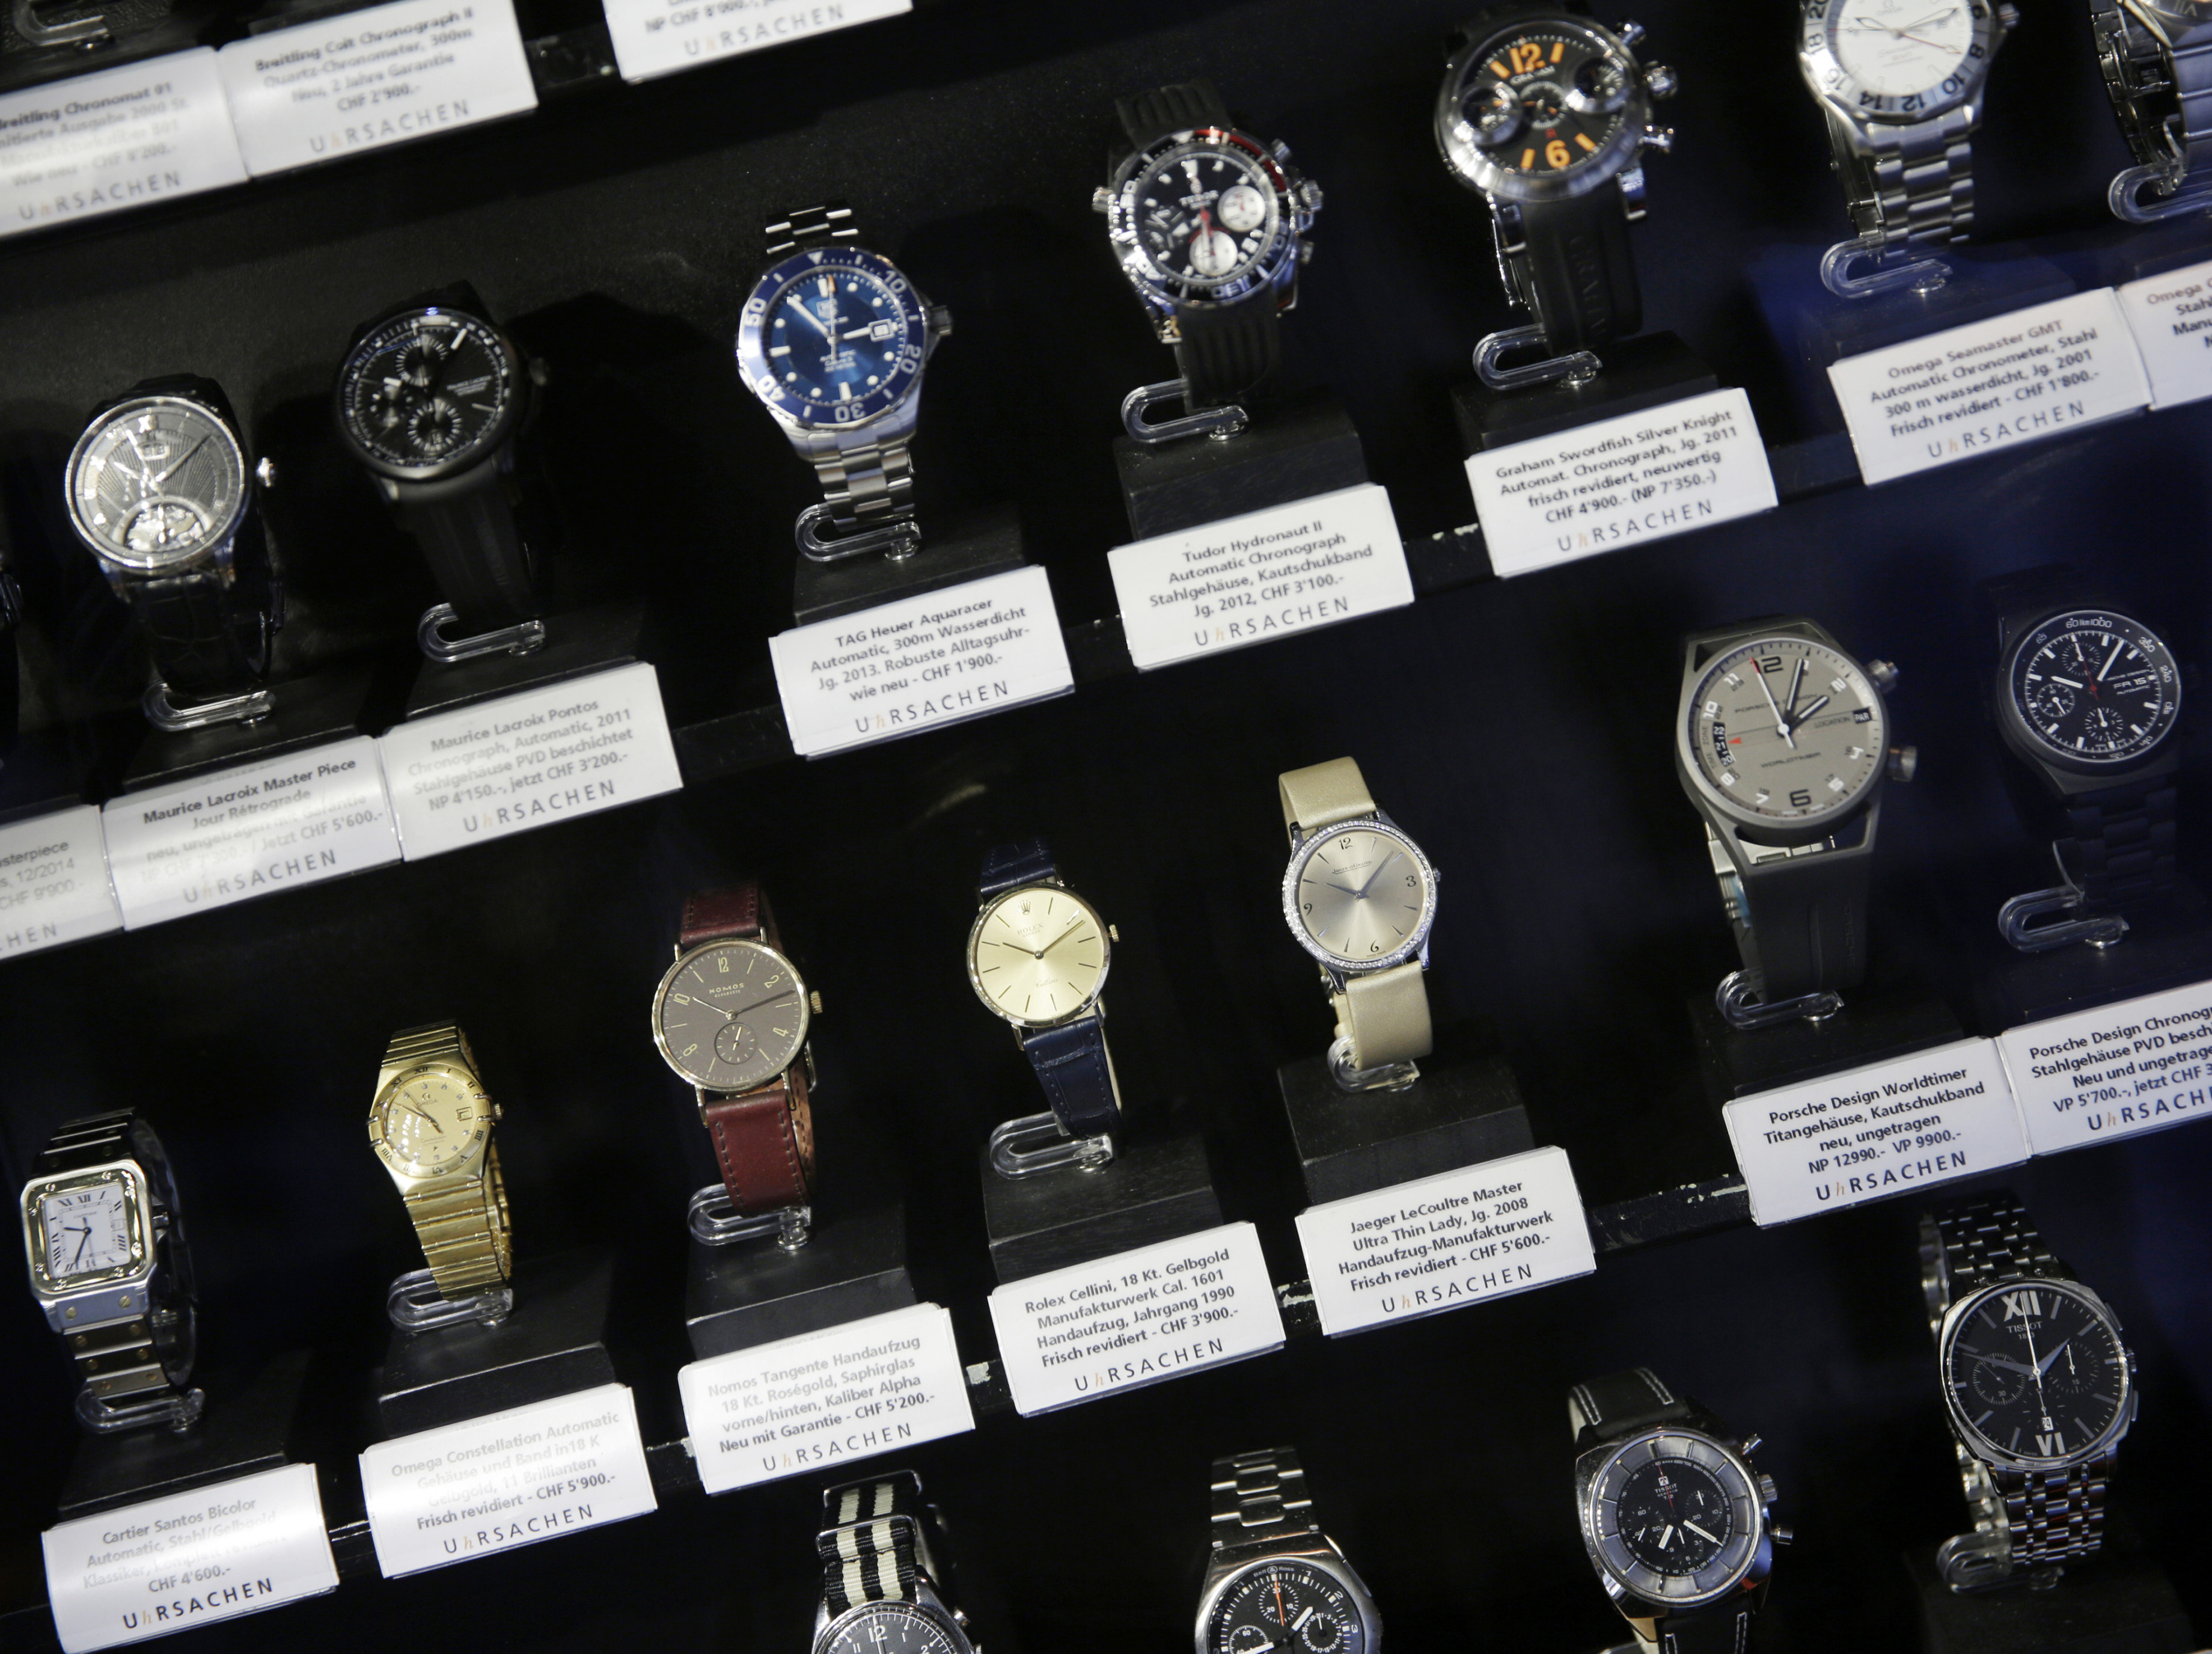 Swiss Watch Brand Maurice Lacroix Up for Sale on Franc Surge - Bloomberg